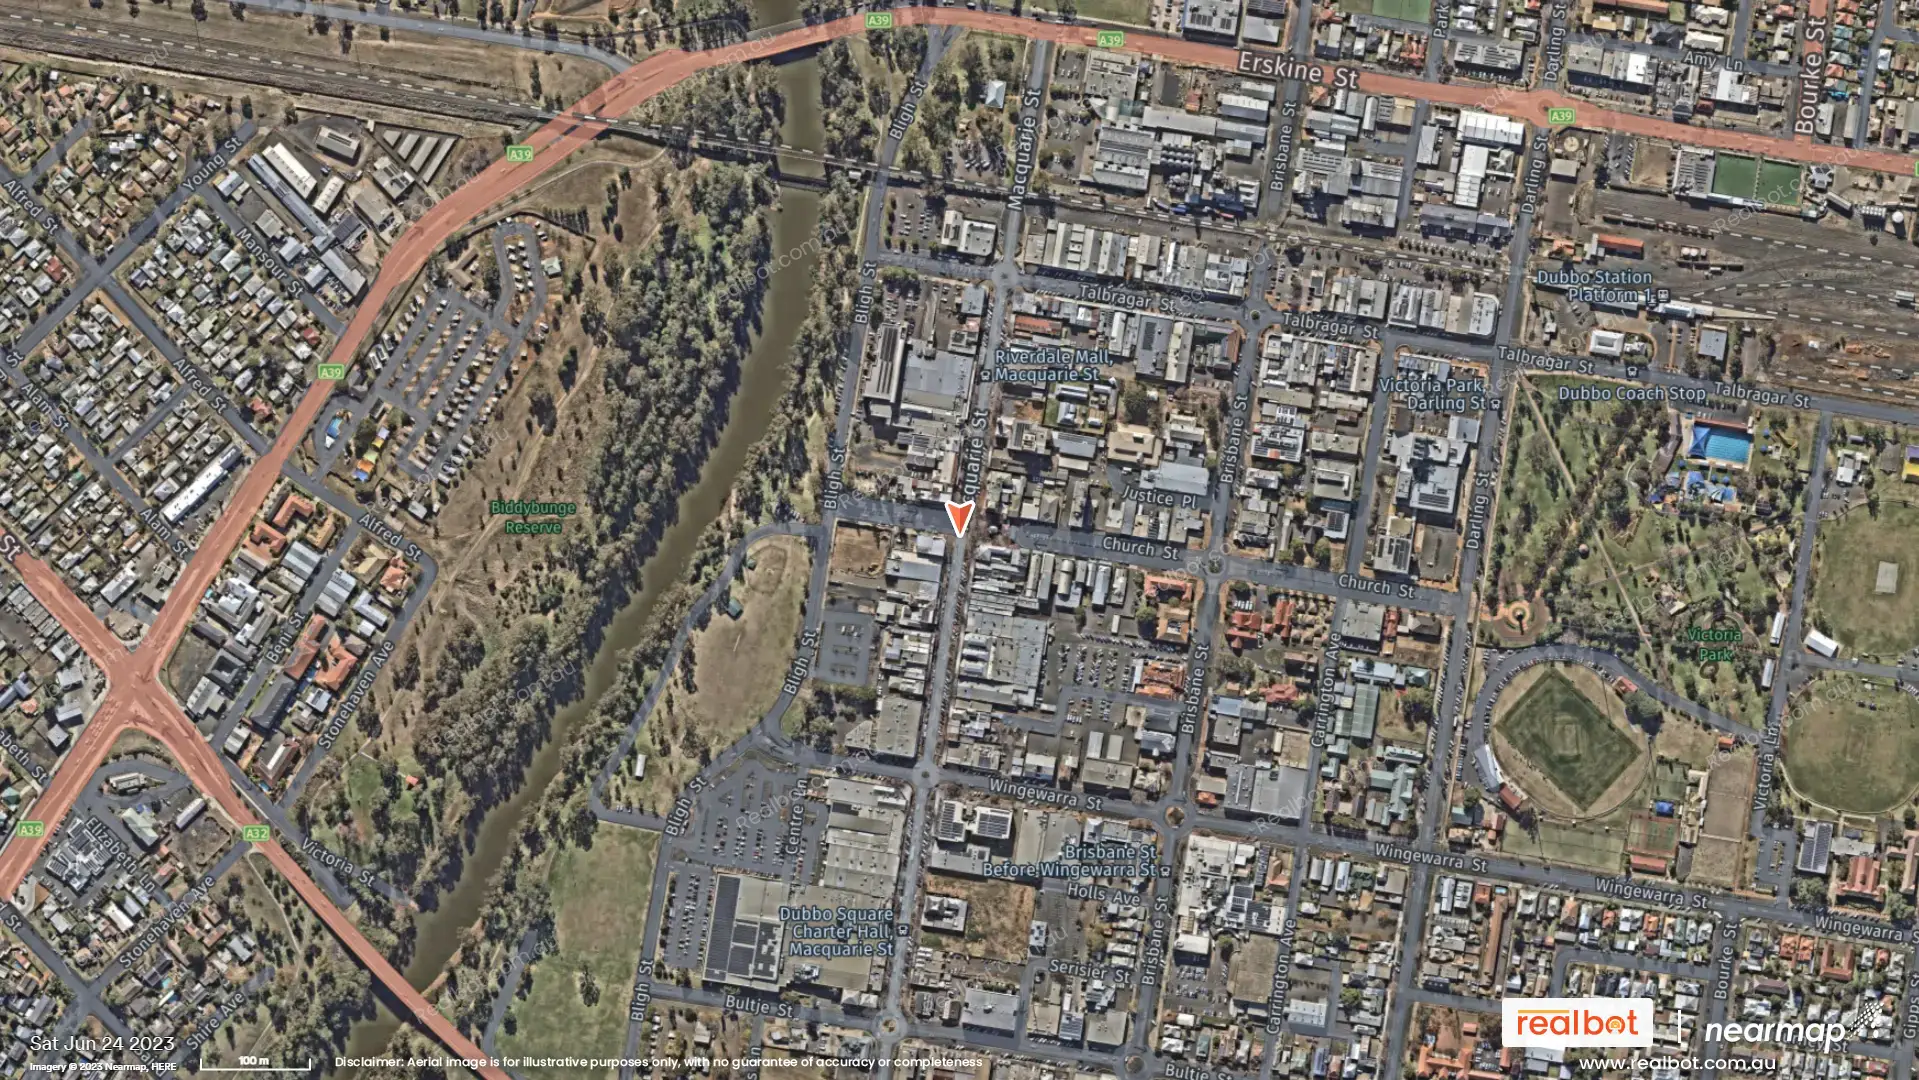 dubbo-nsw-2830-Suburb-Profile-And-Aerial-Images-Real-Search